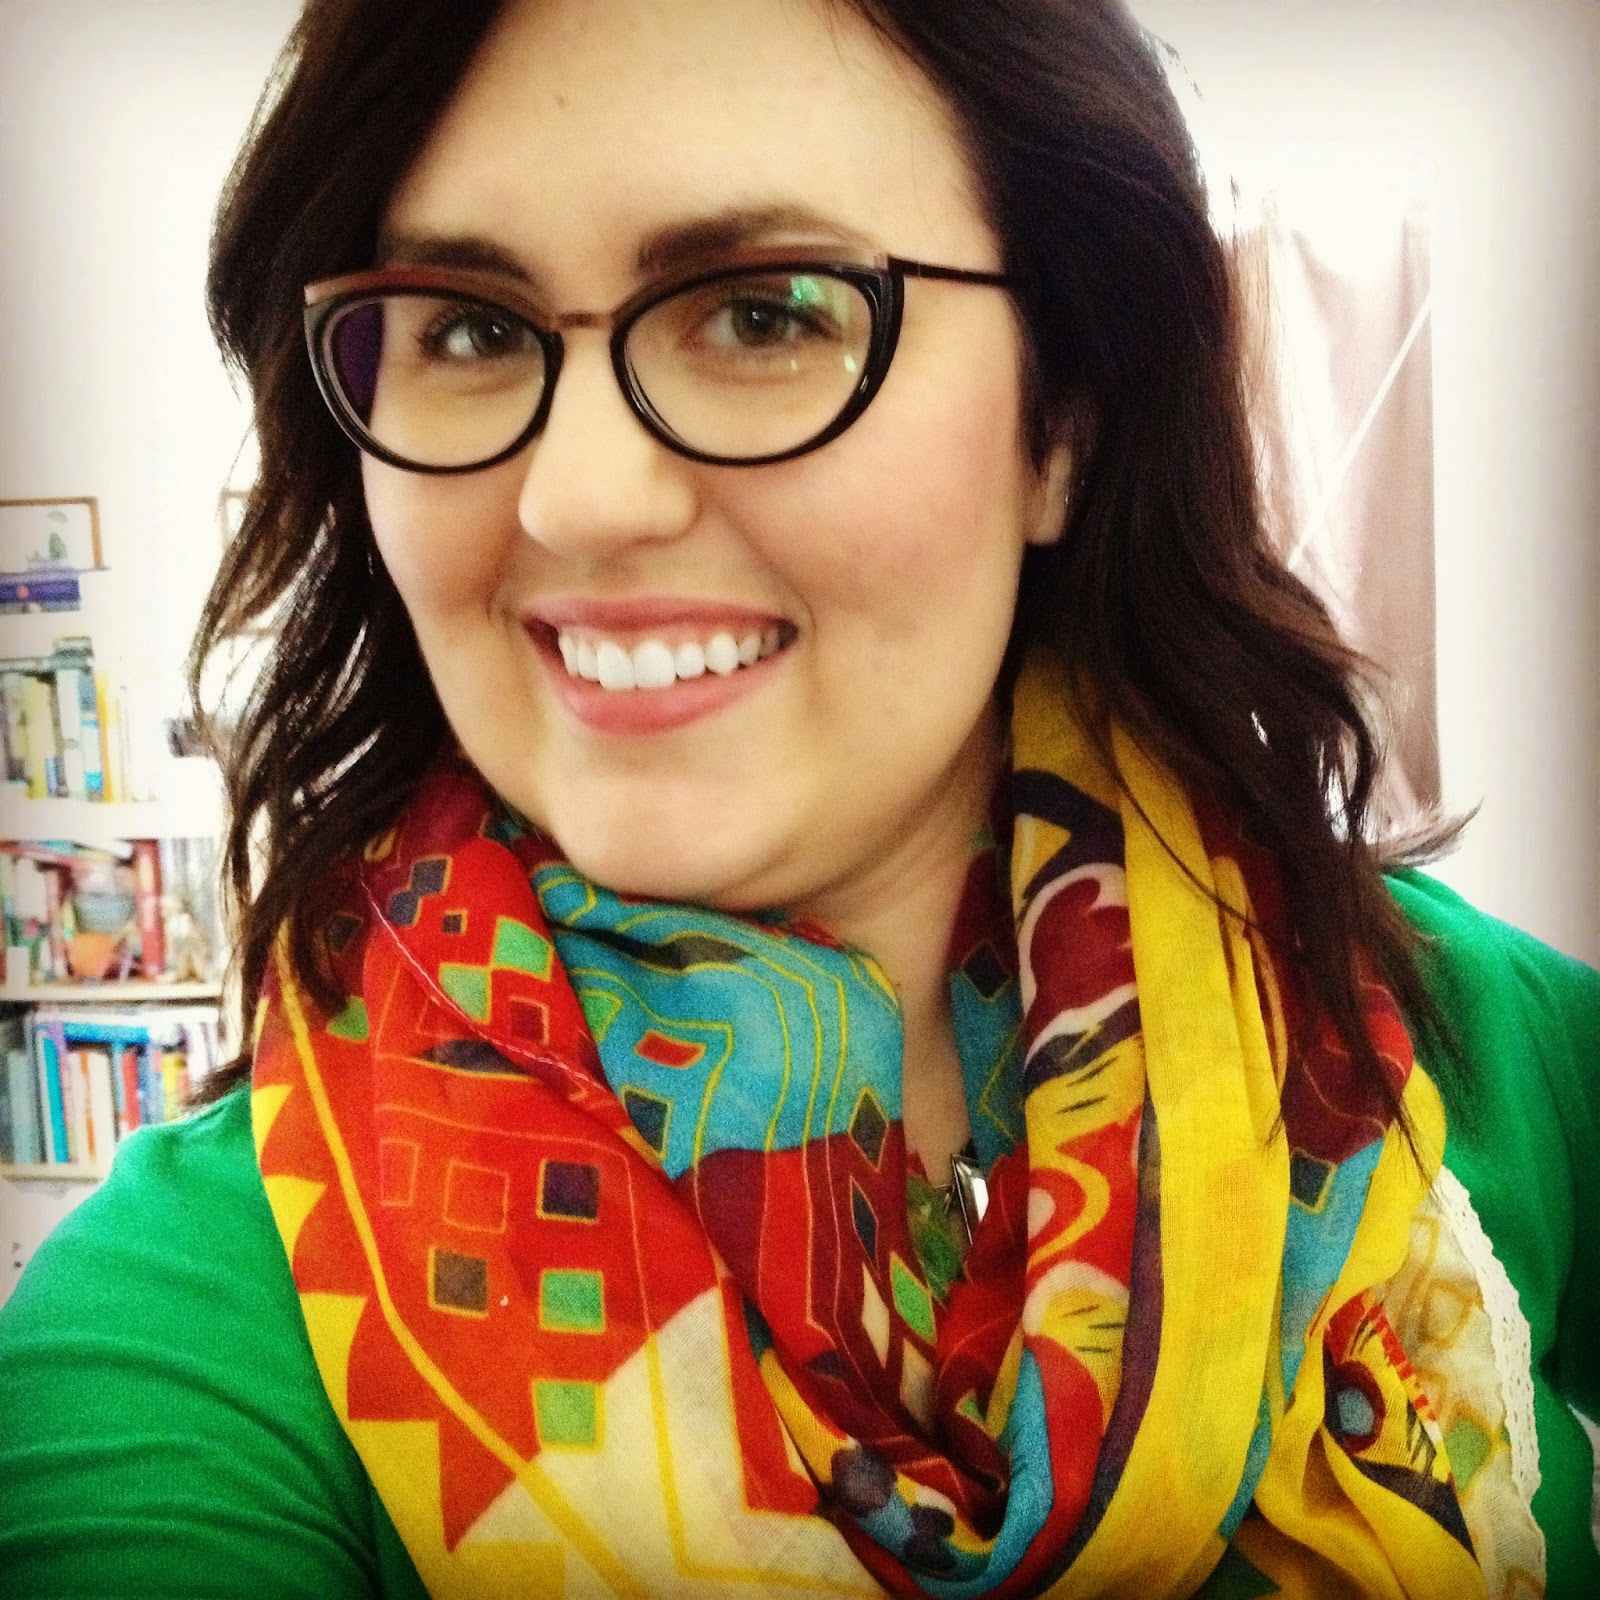 BonLook Review: A Tale of Two Glasses by popular North Carolina style blogger Rebecca Lately